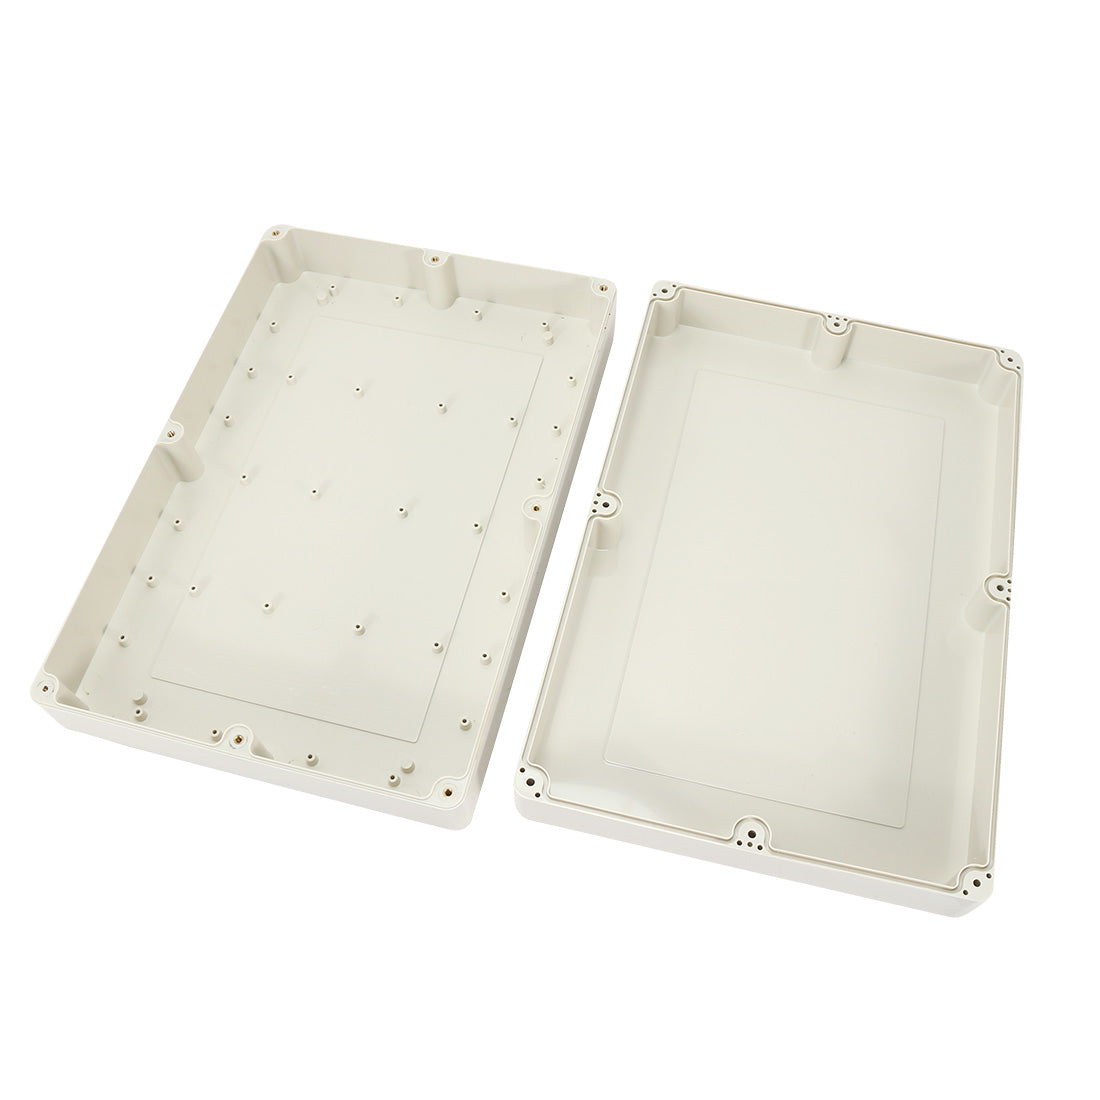 uxcell Uxcell 15"x10.2"x3.4"(380mmx260mmx85mm) ABS Junction Box Universal Electric Project Enclosure